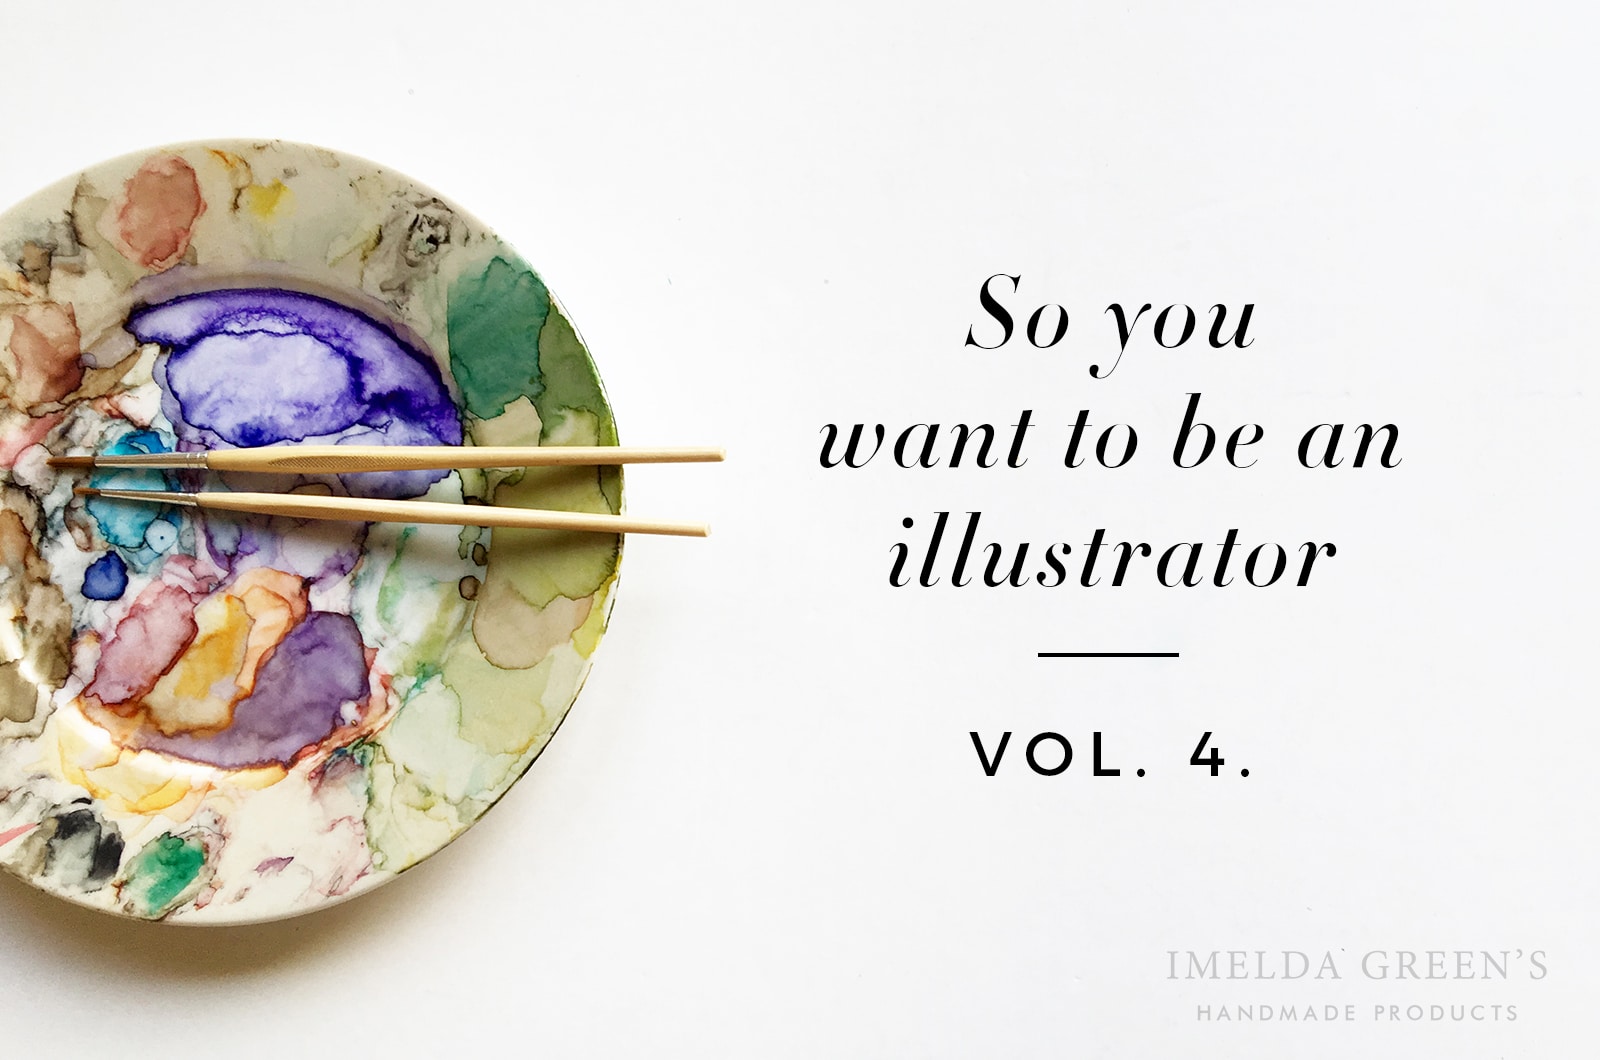 5 best tips to become an illustrator